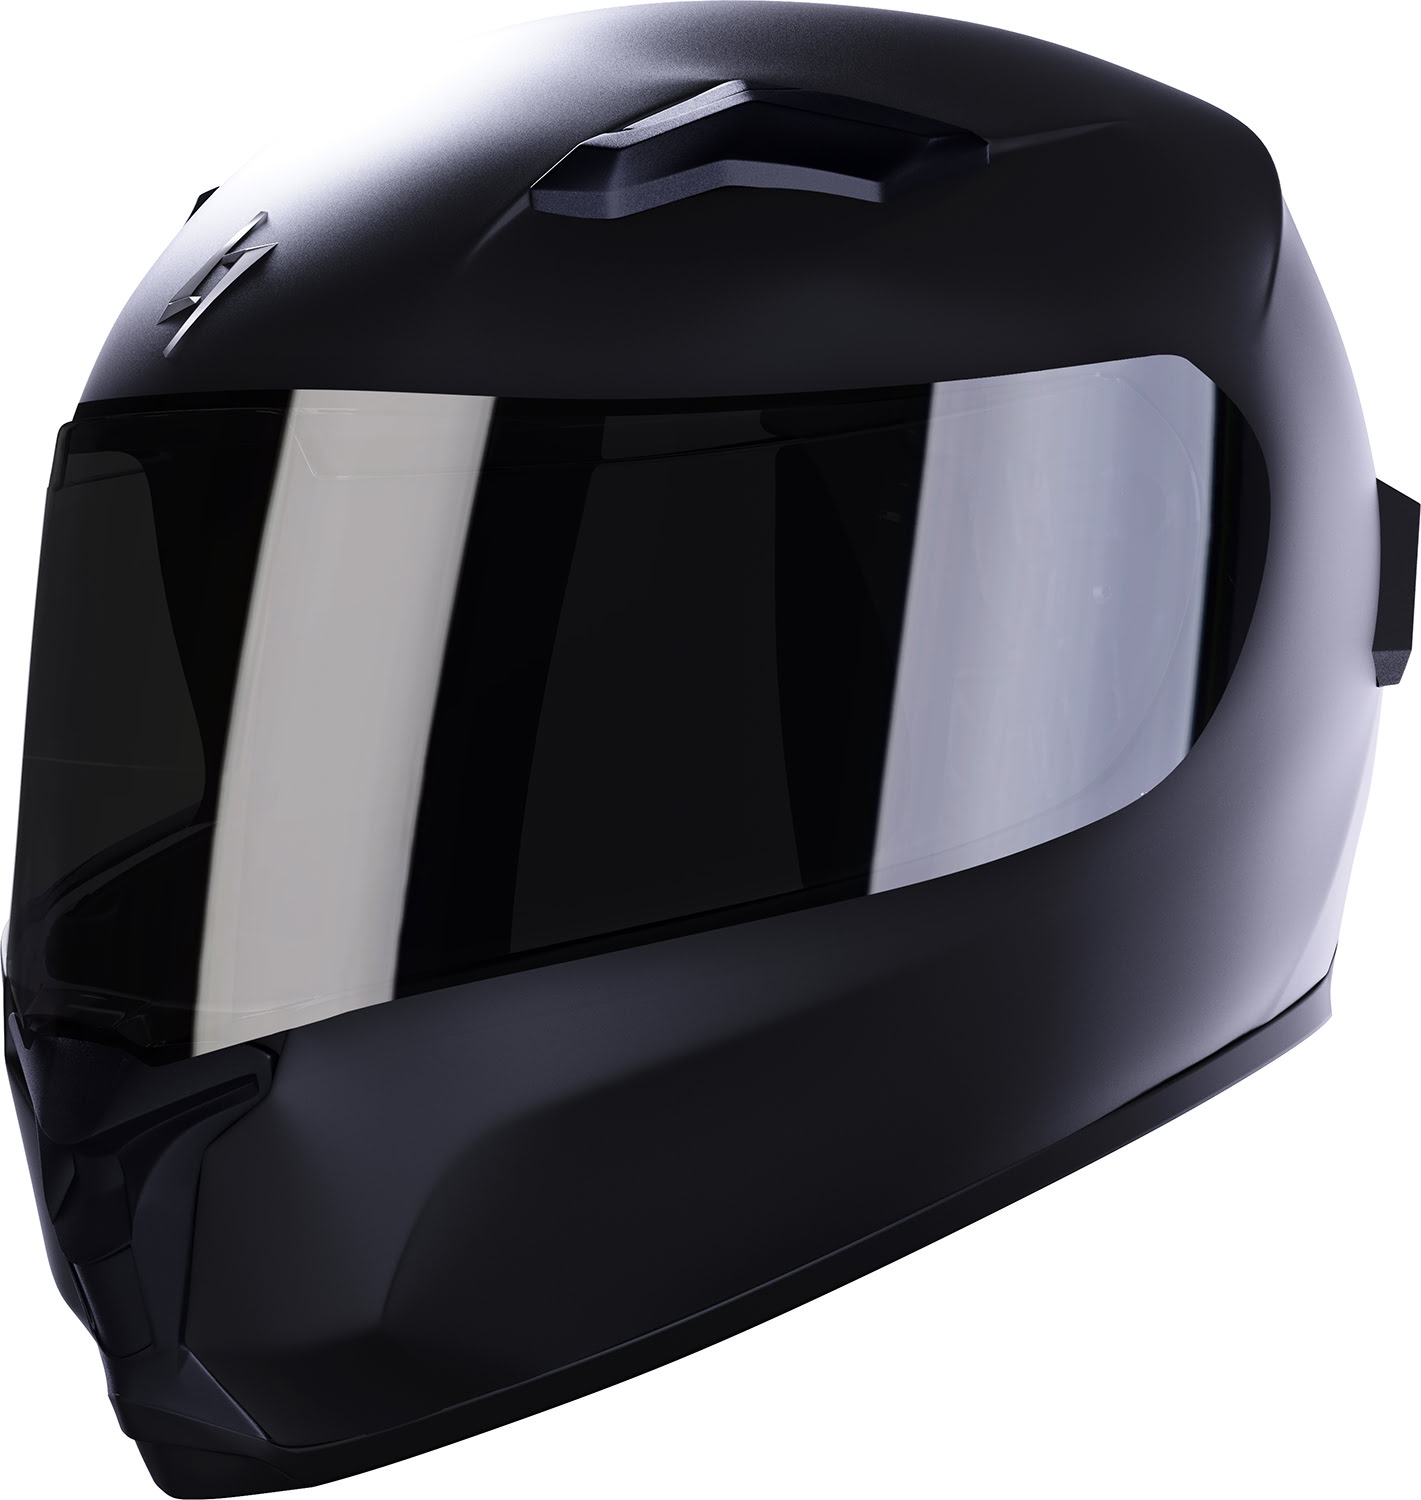 Capacete WISE SOLID Preto Mate STORMER 